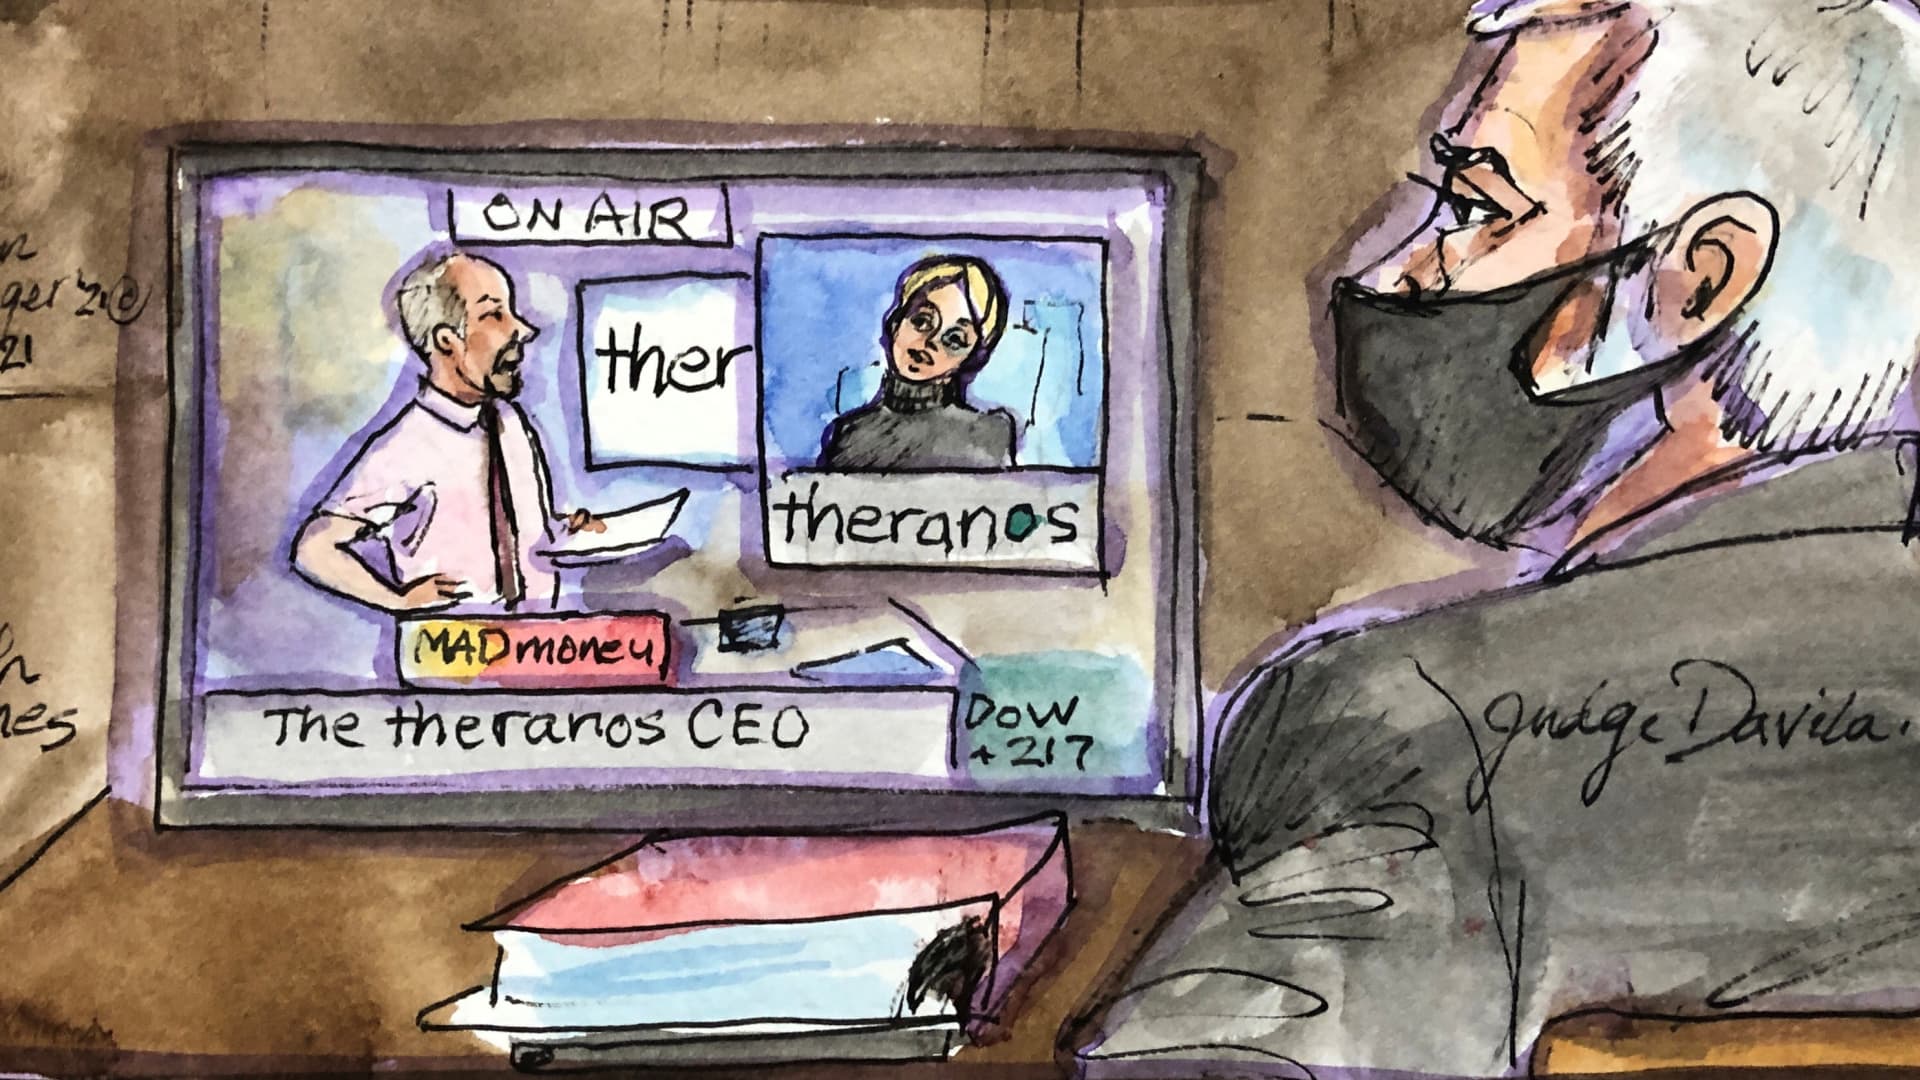 An image of CNBC program Mad Money appears on a screen as Theranos founder Elizabeth Holmes is cross examined by prosecutor Robert Leach at Robert F. Peckham U.S. Courthouse during her trial, in San Jose, California, November 30, 2021 in this courtroom sketch.